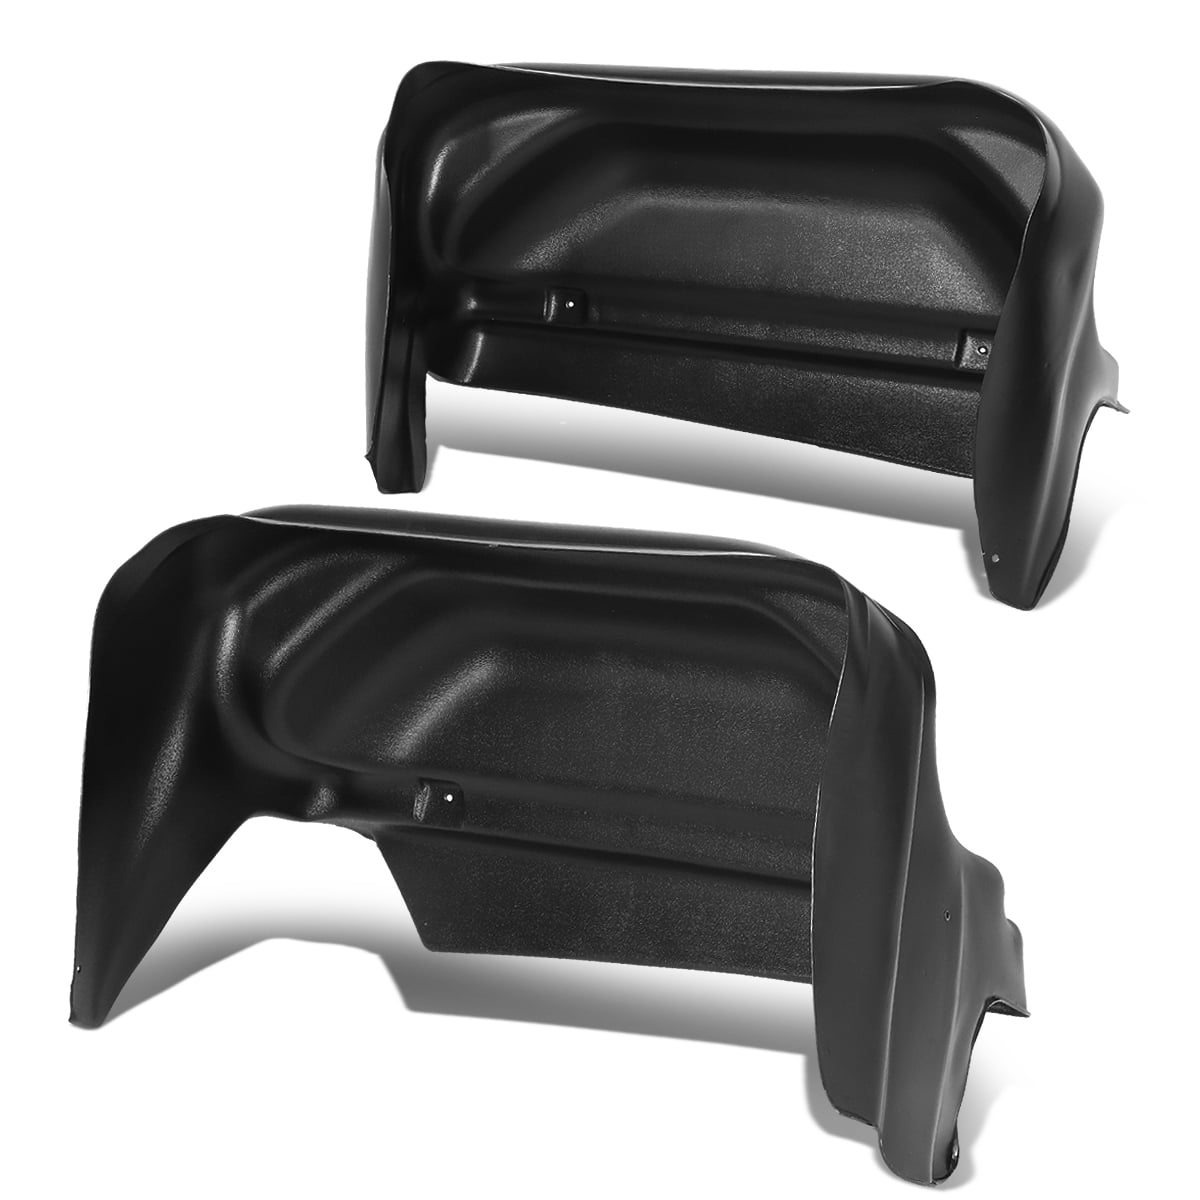 2020 Chevy 2500hd Rear Wheel Well Liner